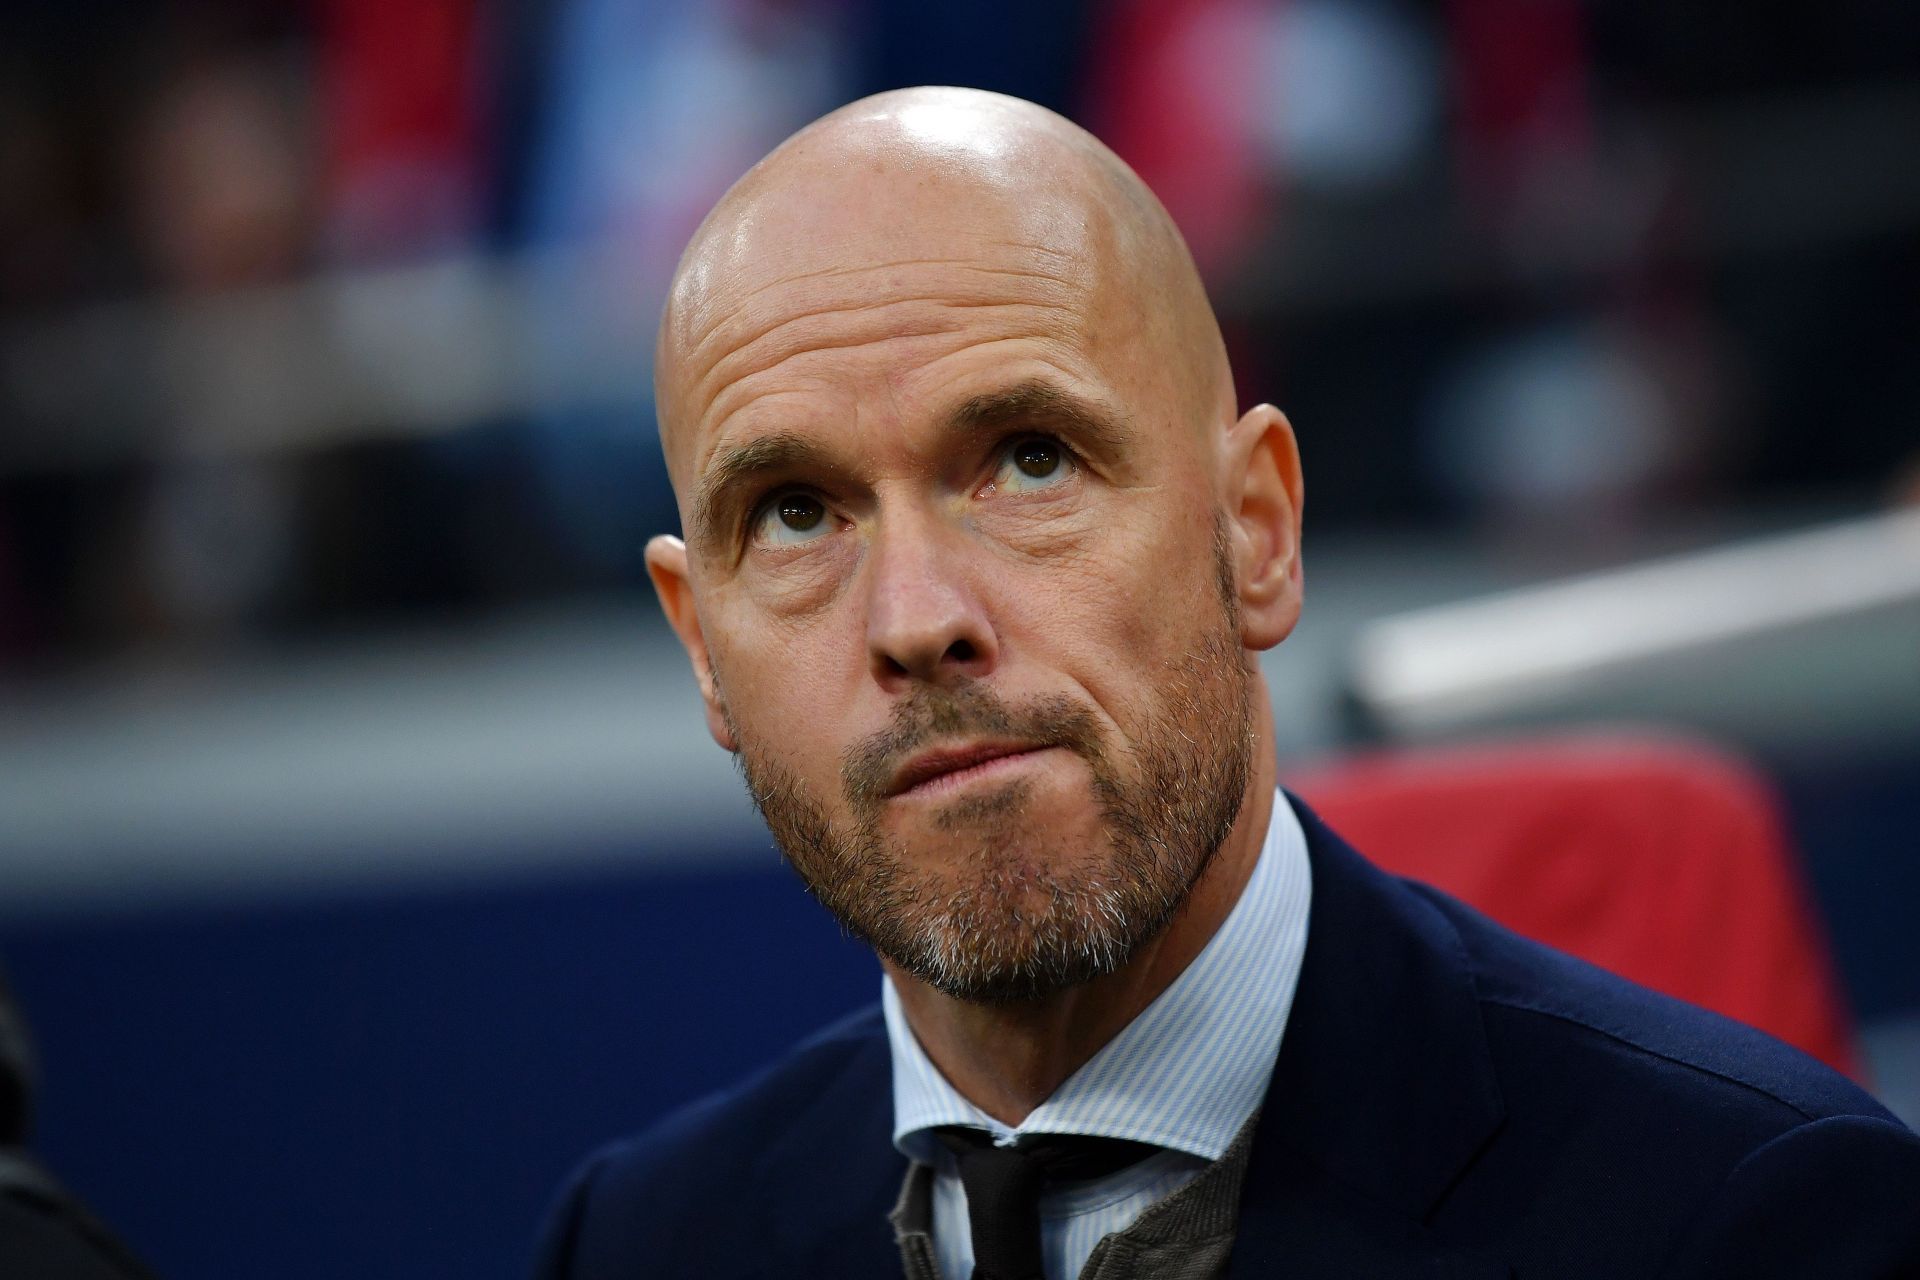 Erik ten Hag will take charge at Old Trafford in June.